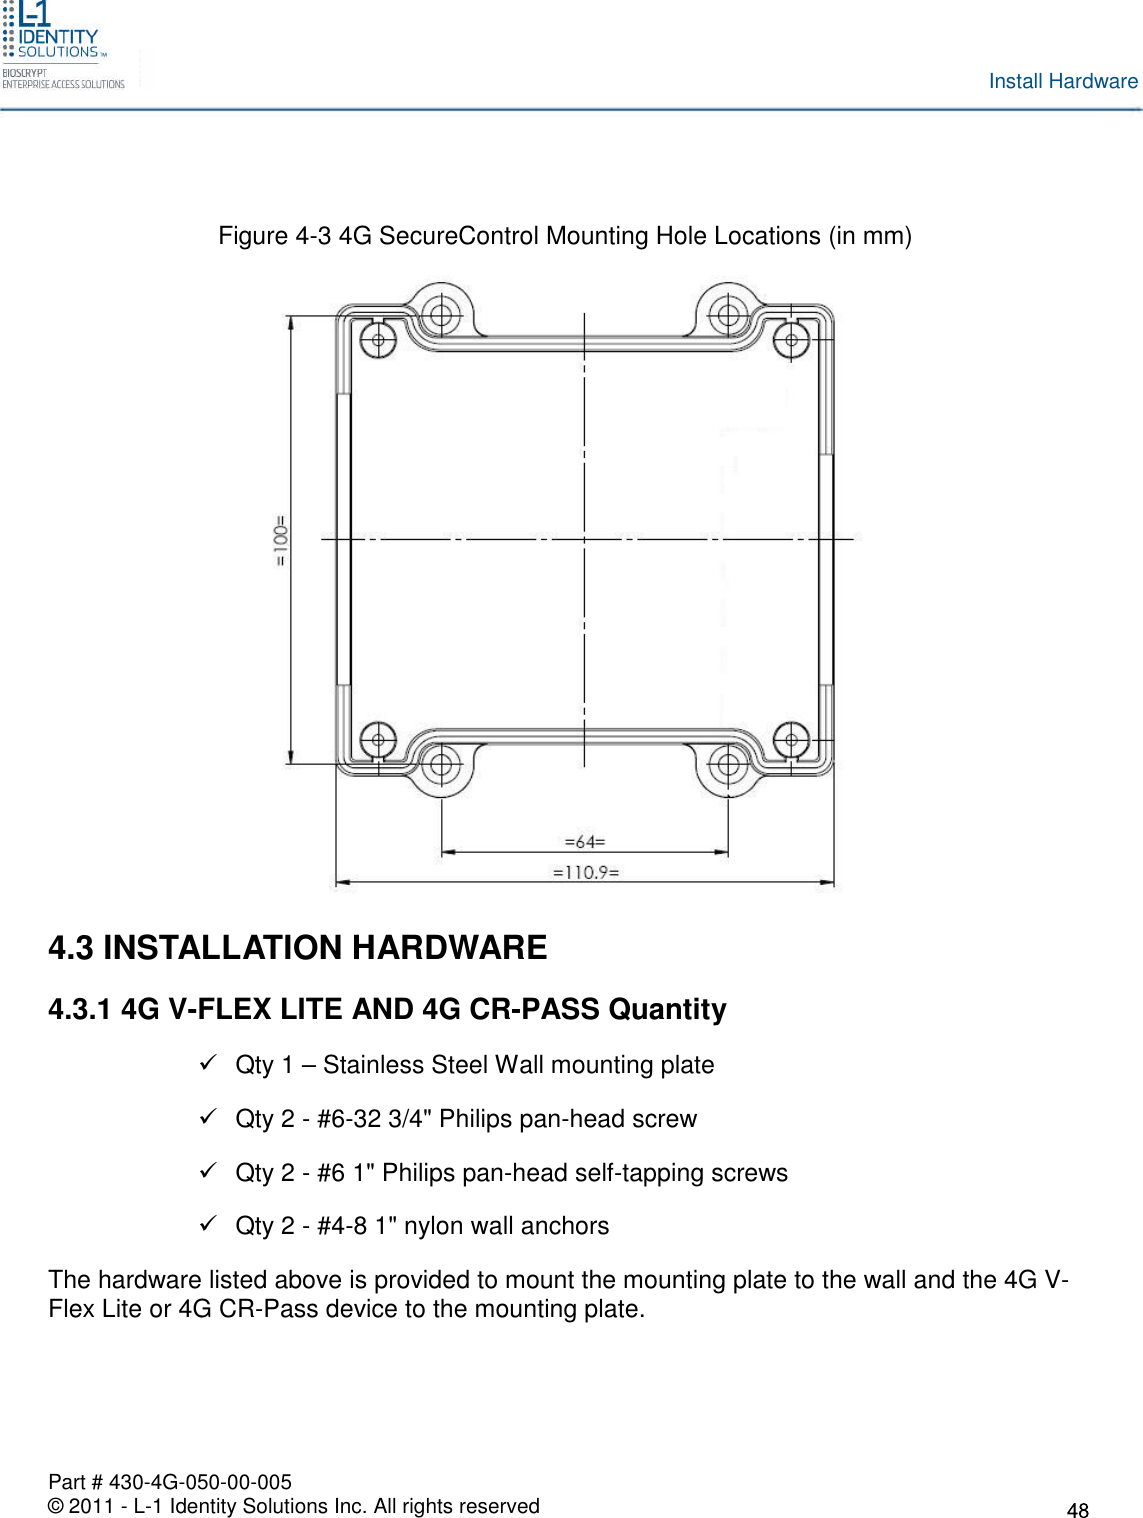 Part # 430-4G-050-00-005© 2011 - L-1 Identity Solutions Inc. All rights reservedInstall HardwareFigure 4-3 4G SecureControl Mounting Hole Locations (in mm)4.3 INSTALLATION HARDWARE4.3.1 4G V-FLEX LITE AND 4G CR-PASS QuantityQty 1 – Stainless Steel Wall mounting plateQty 2 - #6-32 3/4&quot; Philips pan-head screwQty 2 - #6 1&quot; Philips pan-head self-tapping screwsQty 2 - #4-8 1&quot; nylon wall anchorsThe hardware listed above is provided to mount the mounting plate to the wall and the 4G V-Flex Lite or 4G CR-Pass device to the mounting plate.